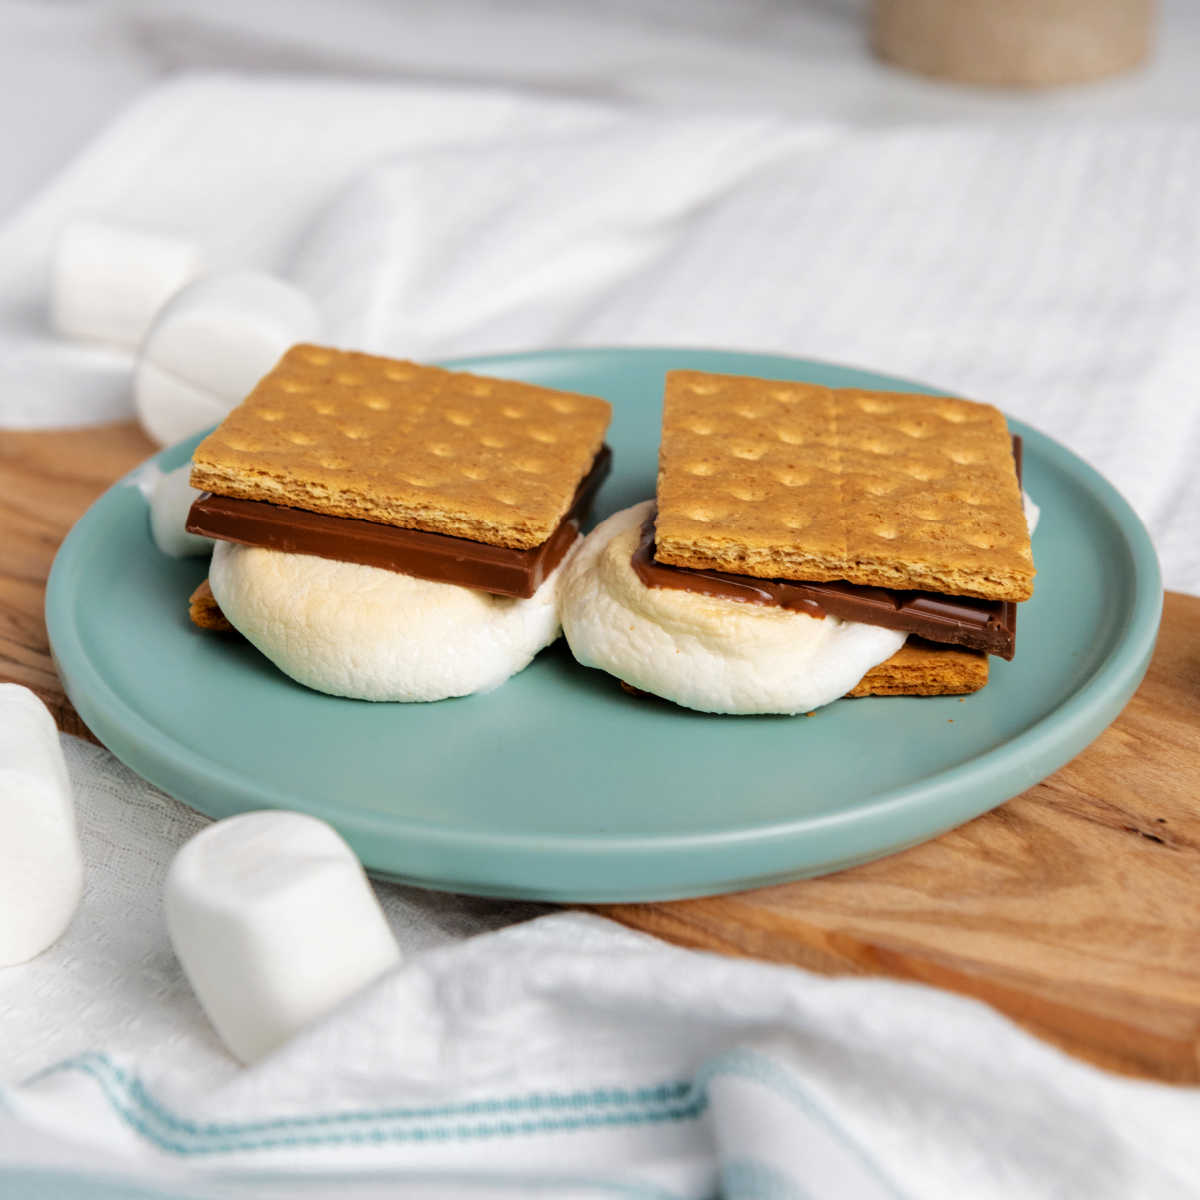 How to Make S’mores in an Air Fryer